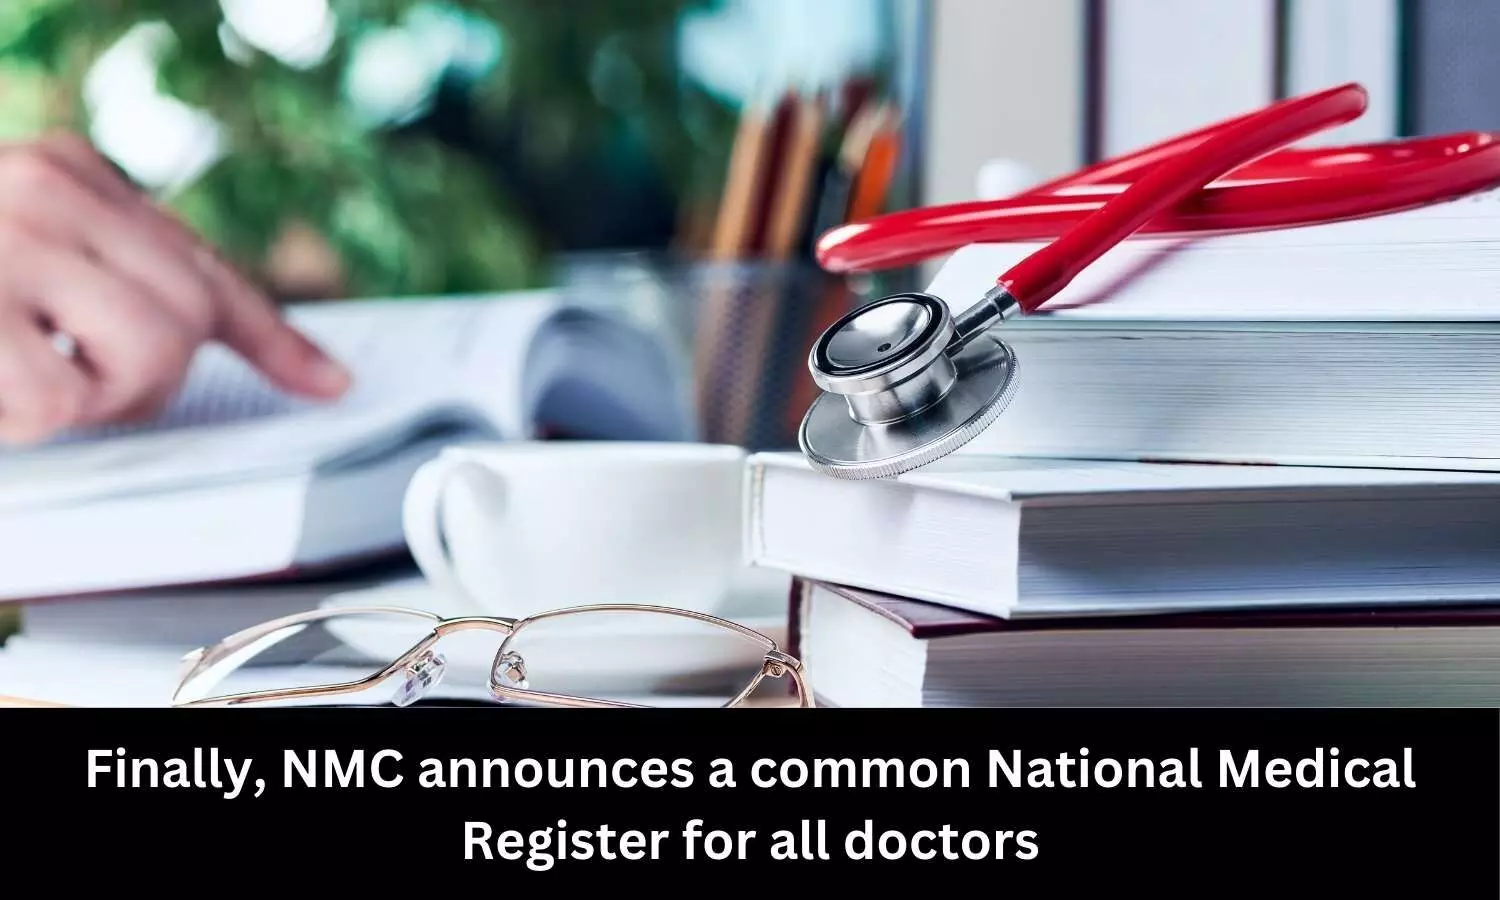 NMC announces common National Medical Register for all doctors